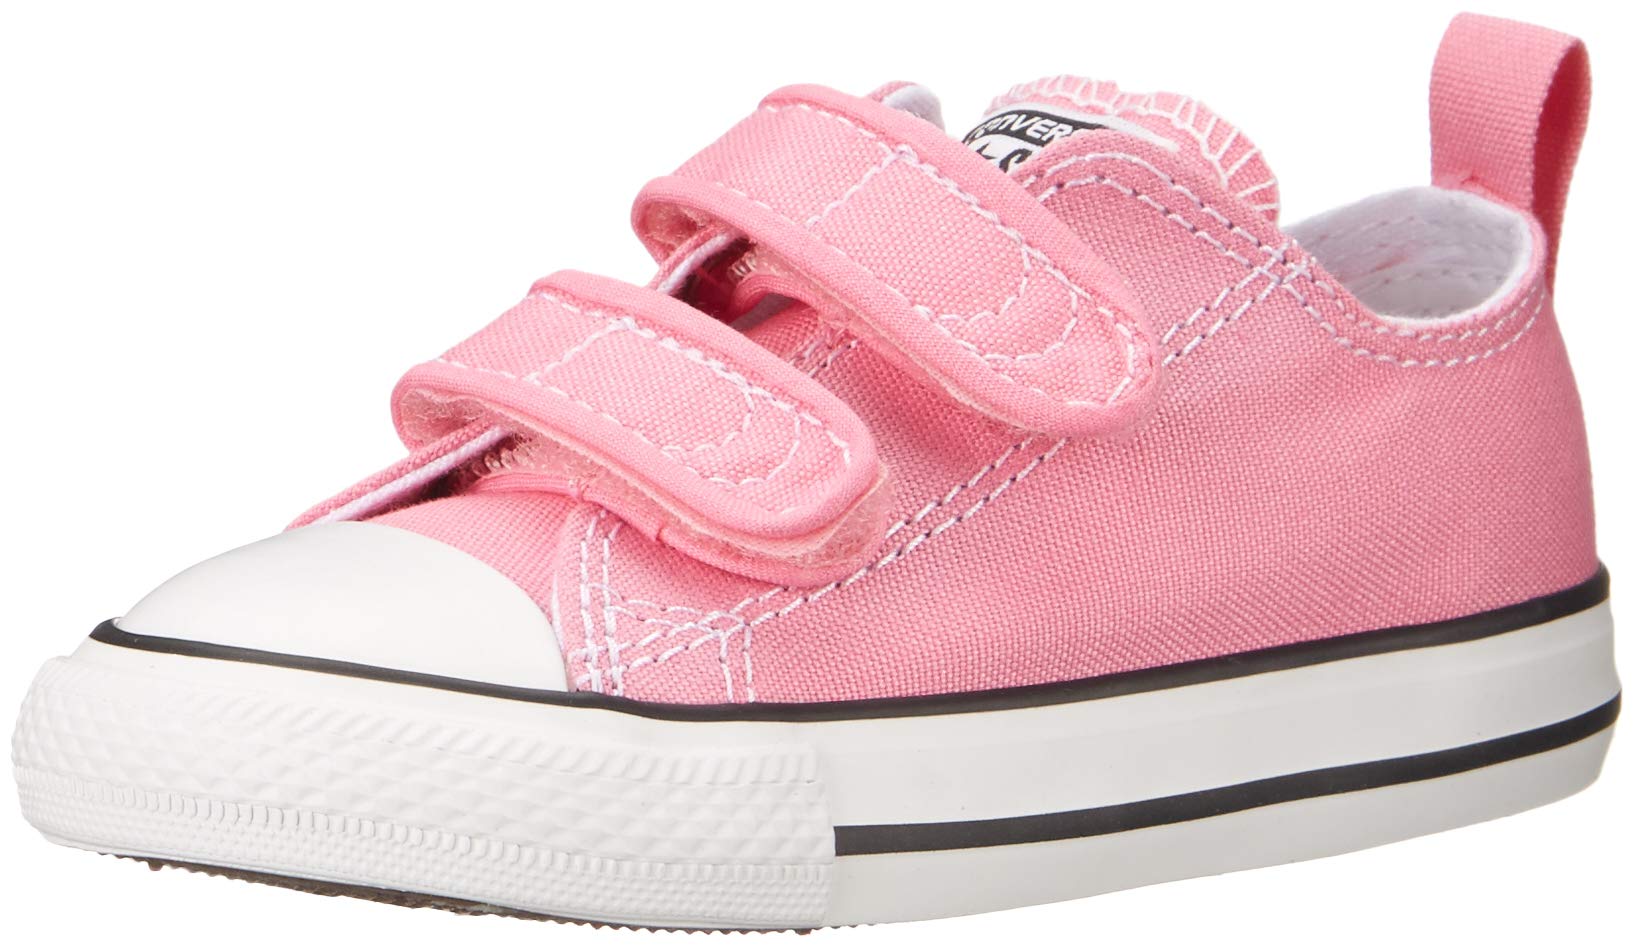 Converse Unisex-Baby Chuck Taylor All Star 2v Low Top Sneaker